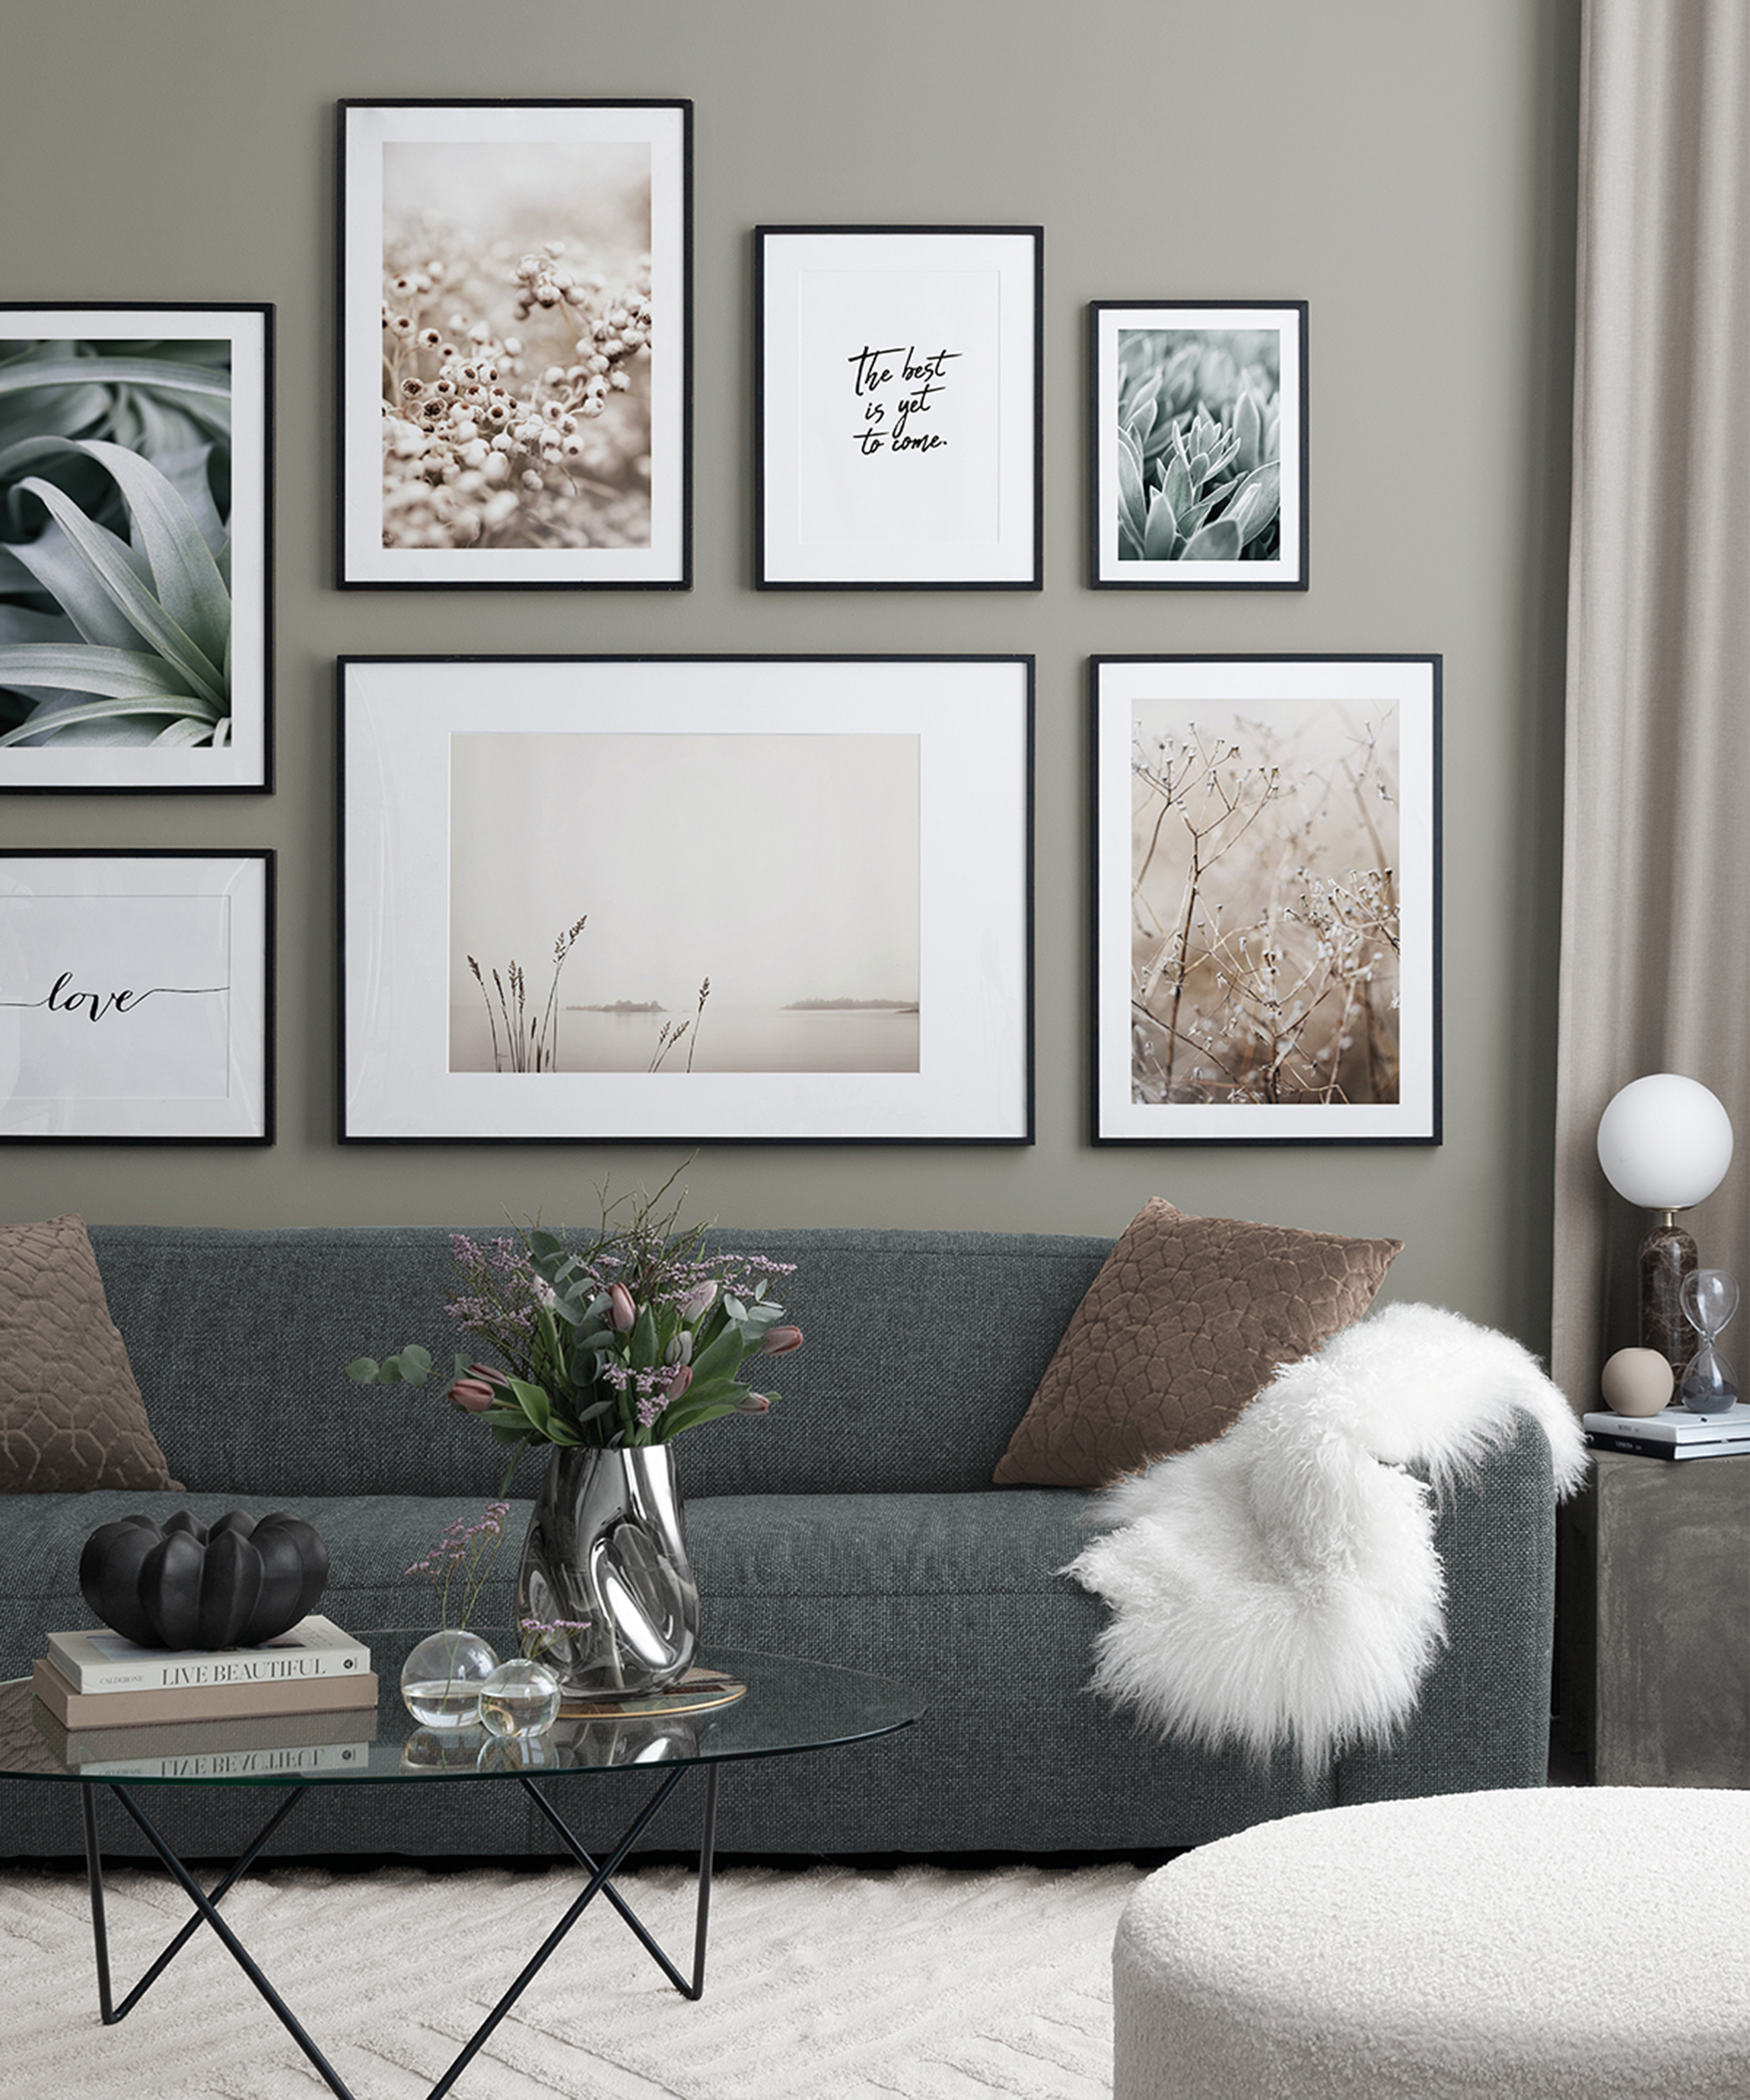 A grey living room with grey sofa and gallery wall with posters from Desenio